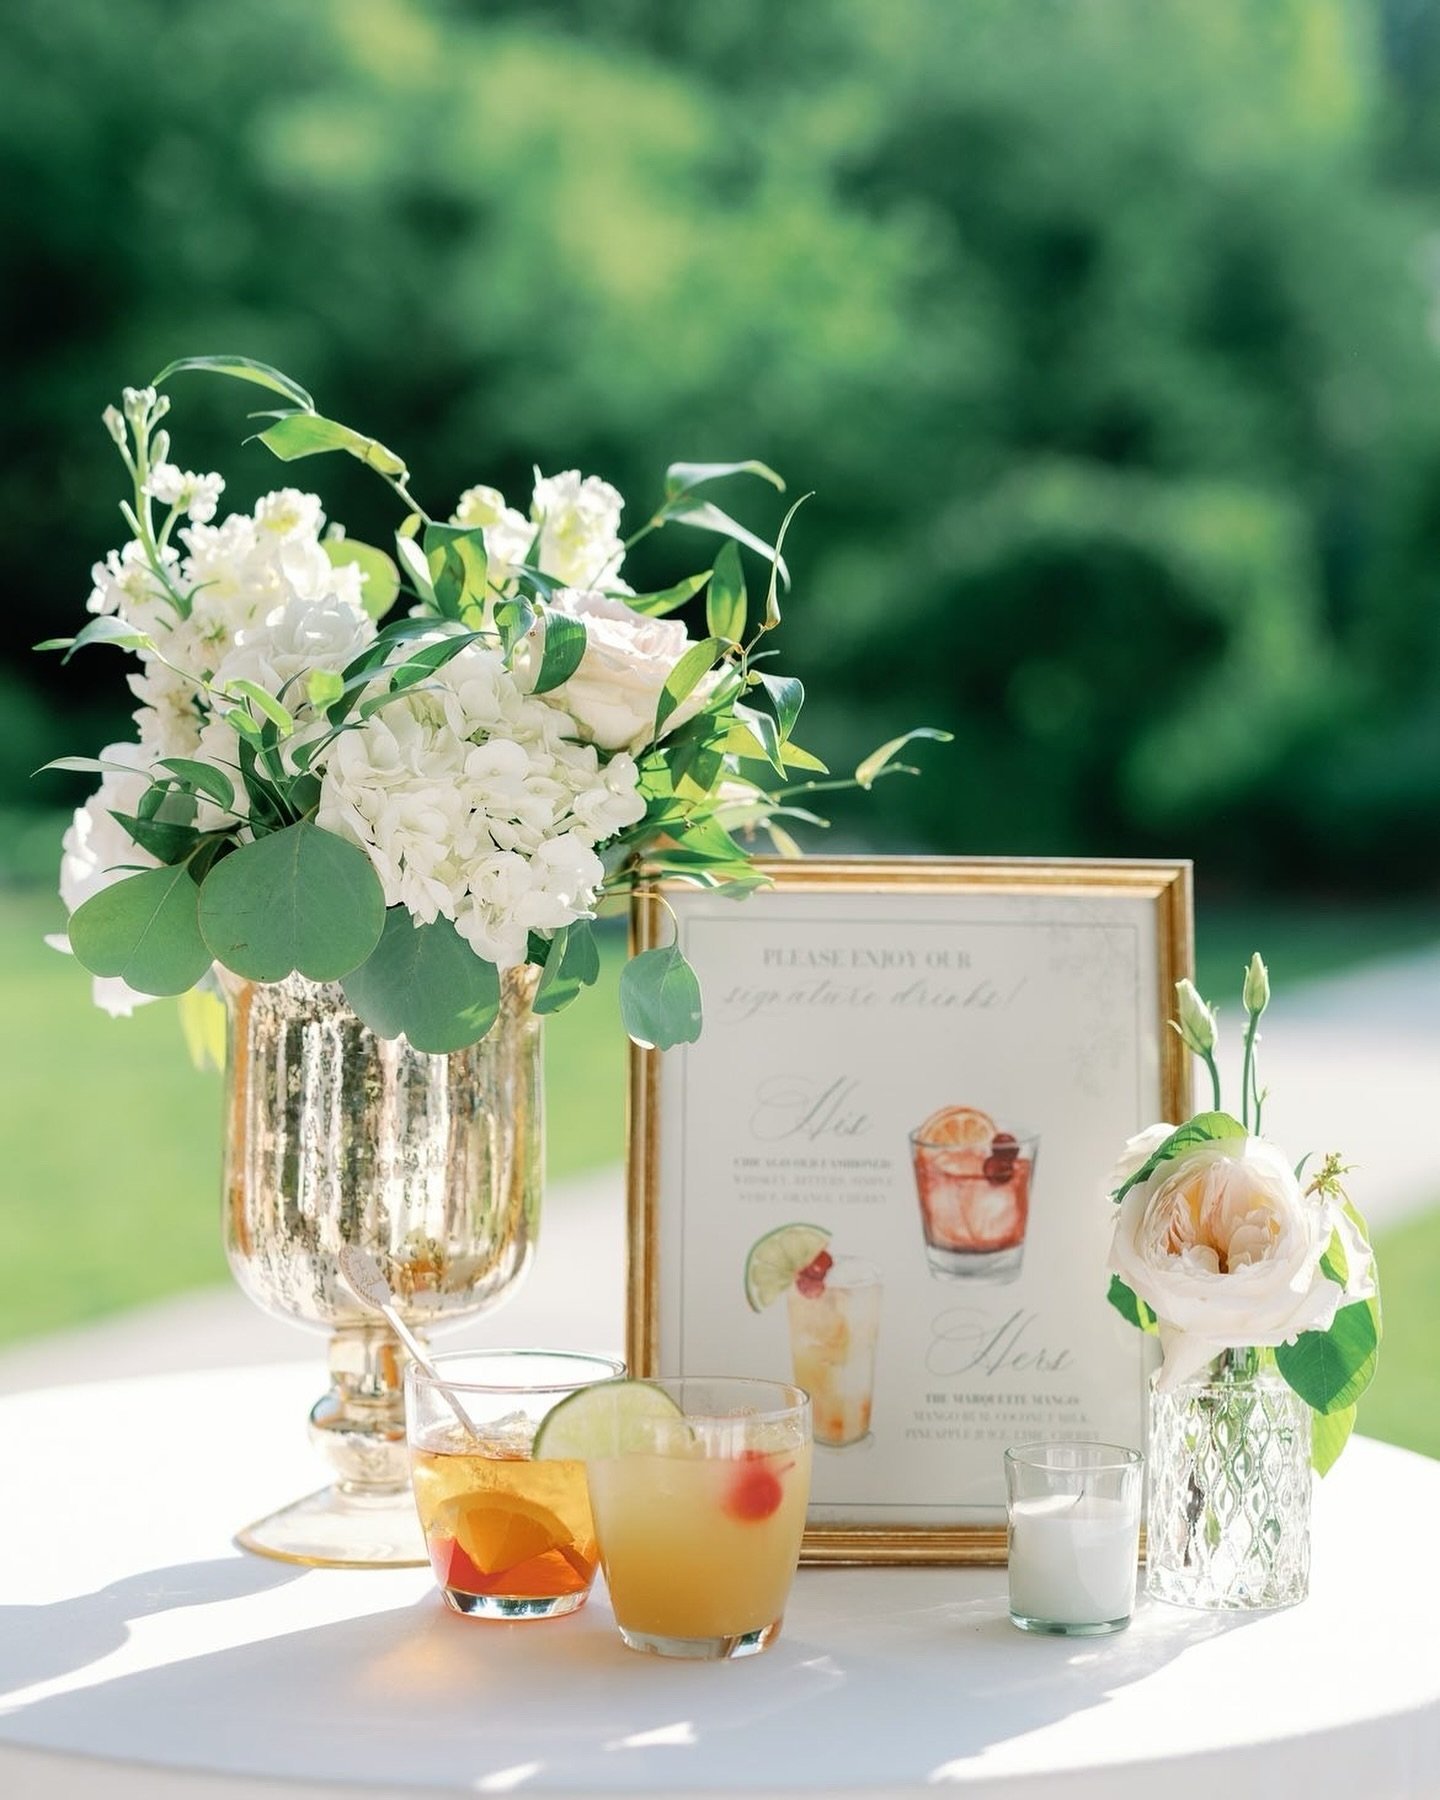 It&rsquo;s finally Friday and the bottle of Prosecco I&rsquo;ve had chilling is ready to be enjoyed.

It&rsquo;s also officially wedding season and signature drinks are still at the top of the list for personal touches. It&rsquo;s a subtle and easy w